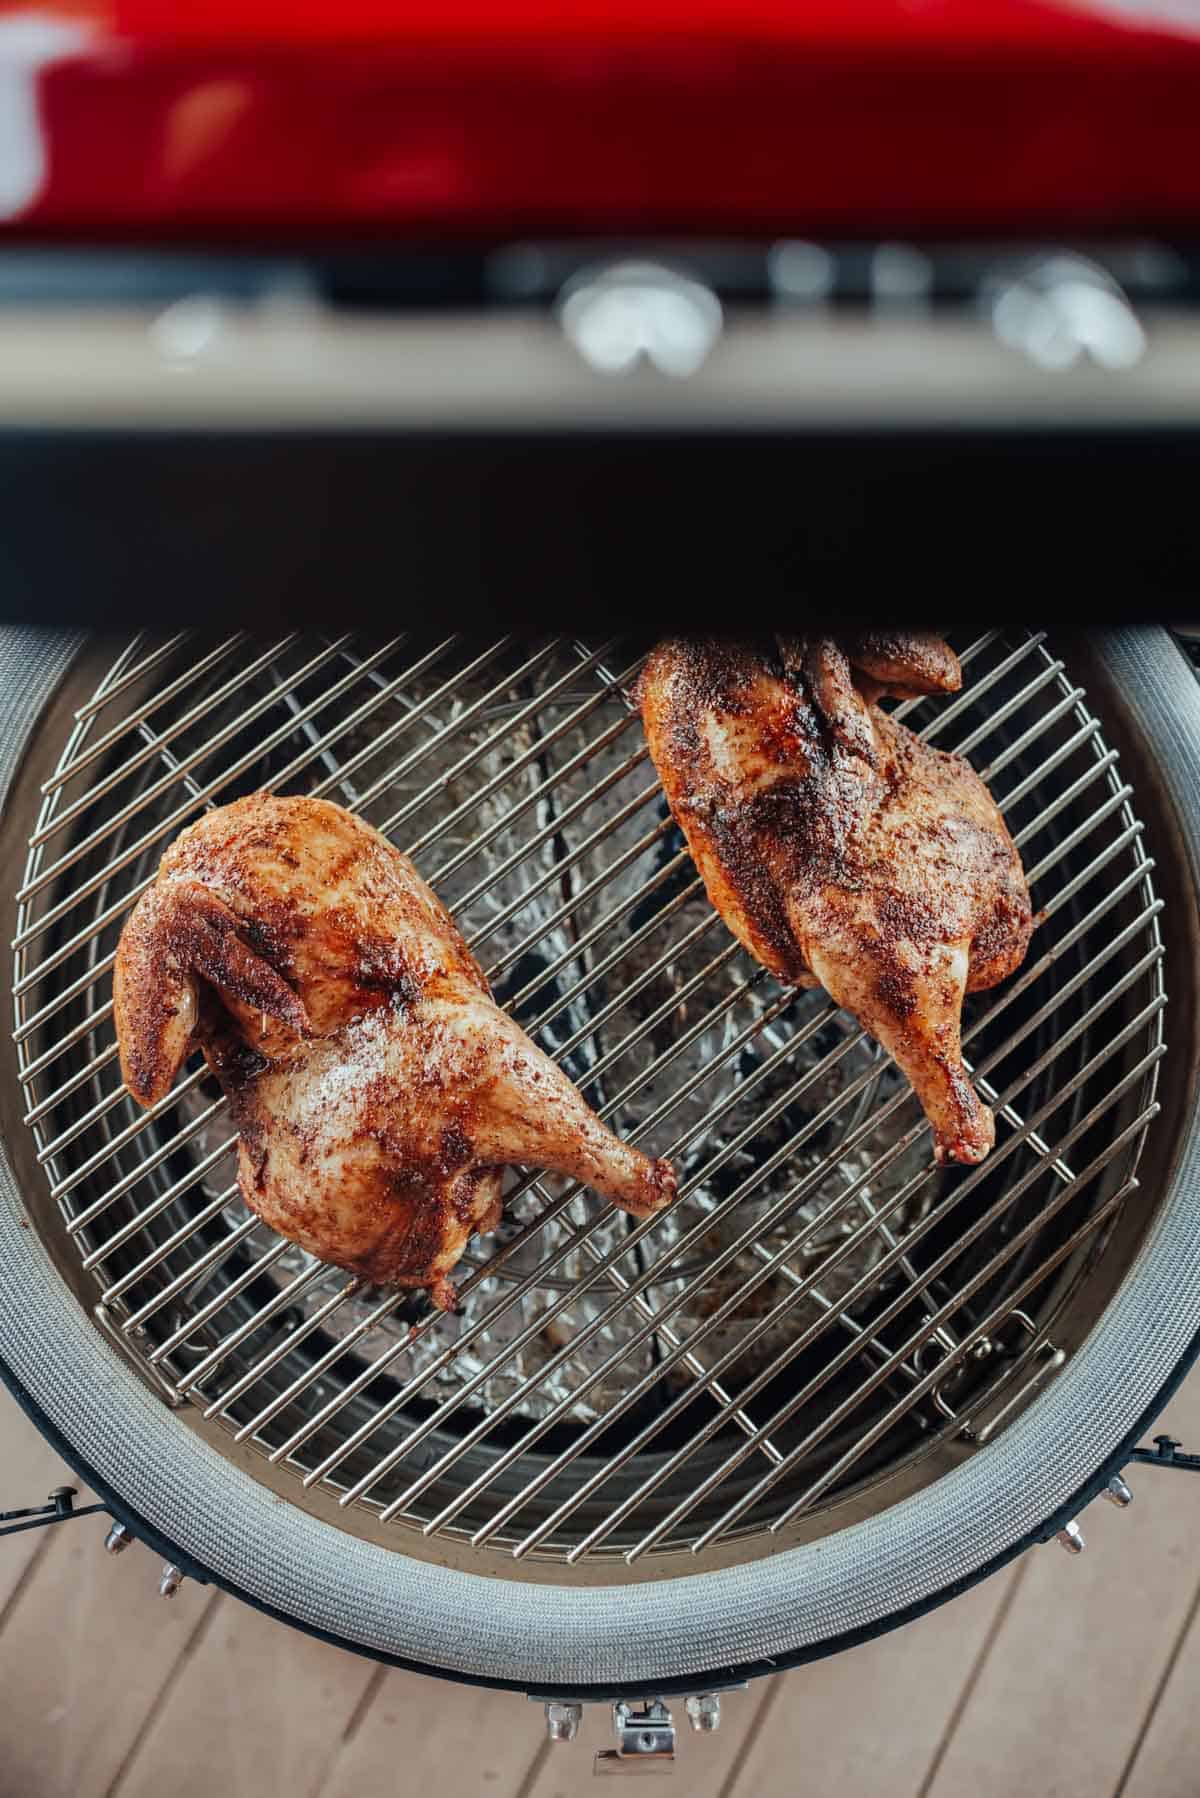 Two seasoned and cooked chicken halves on a round grill grate, viewed from above.